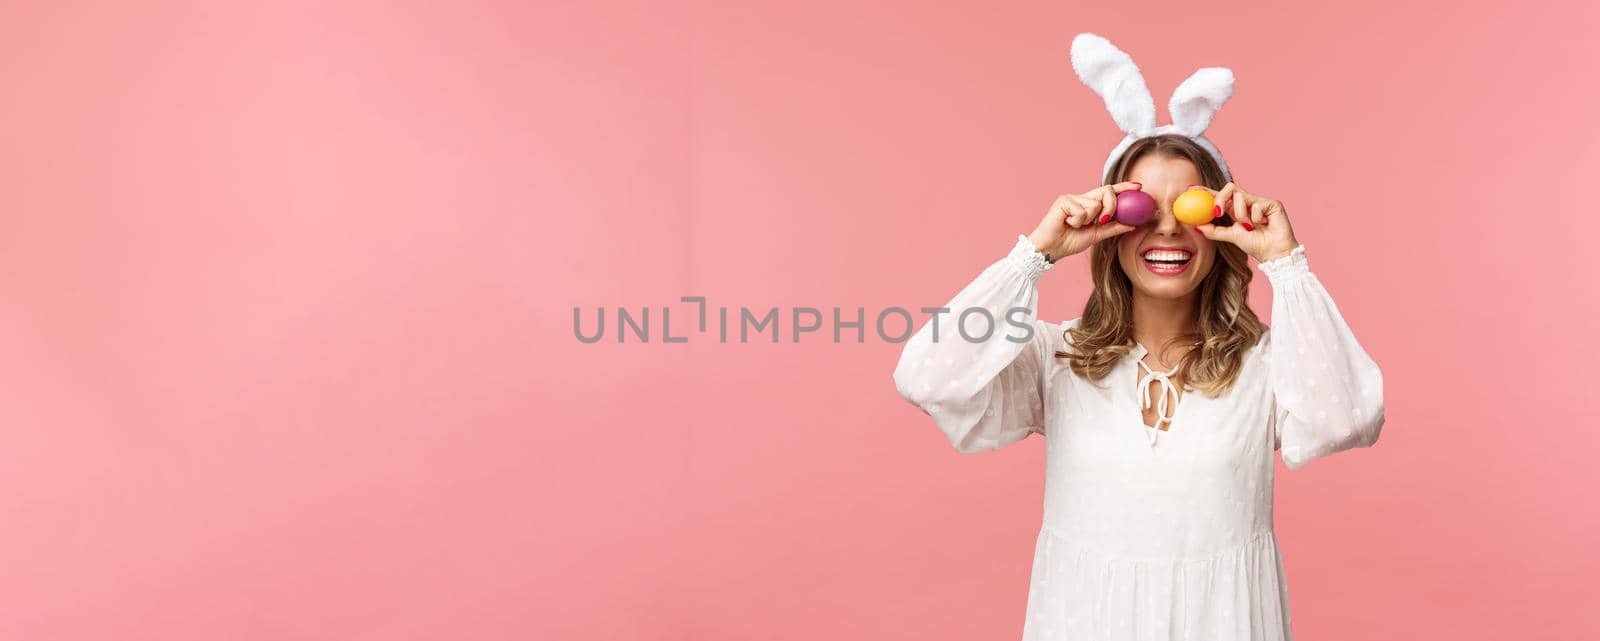 Holidays, spring and party concept. Portrait of lovely, tender smiling woman in rabbit ears and white dress celebrating Easter day, holding painted eggs on eyes and grinning, pink background.